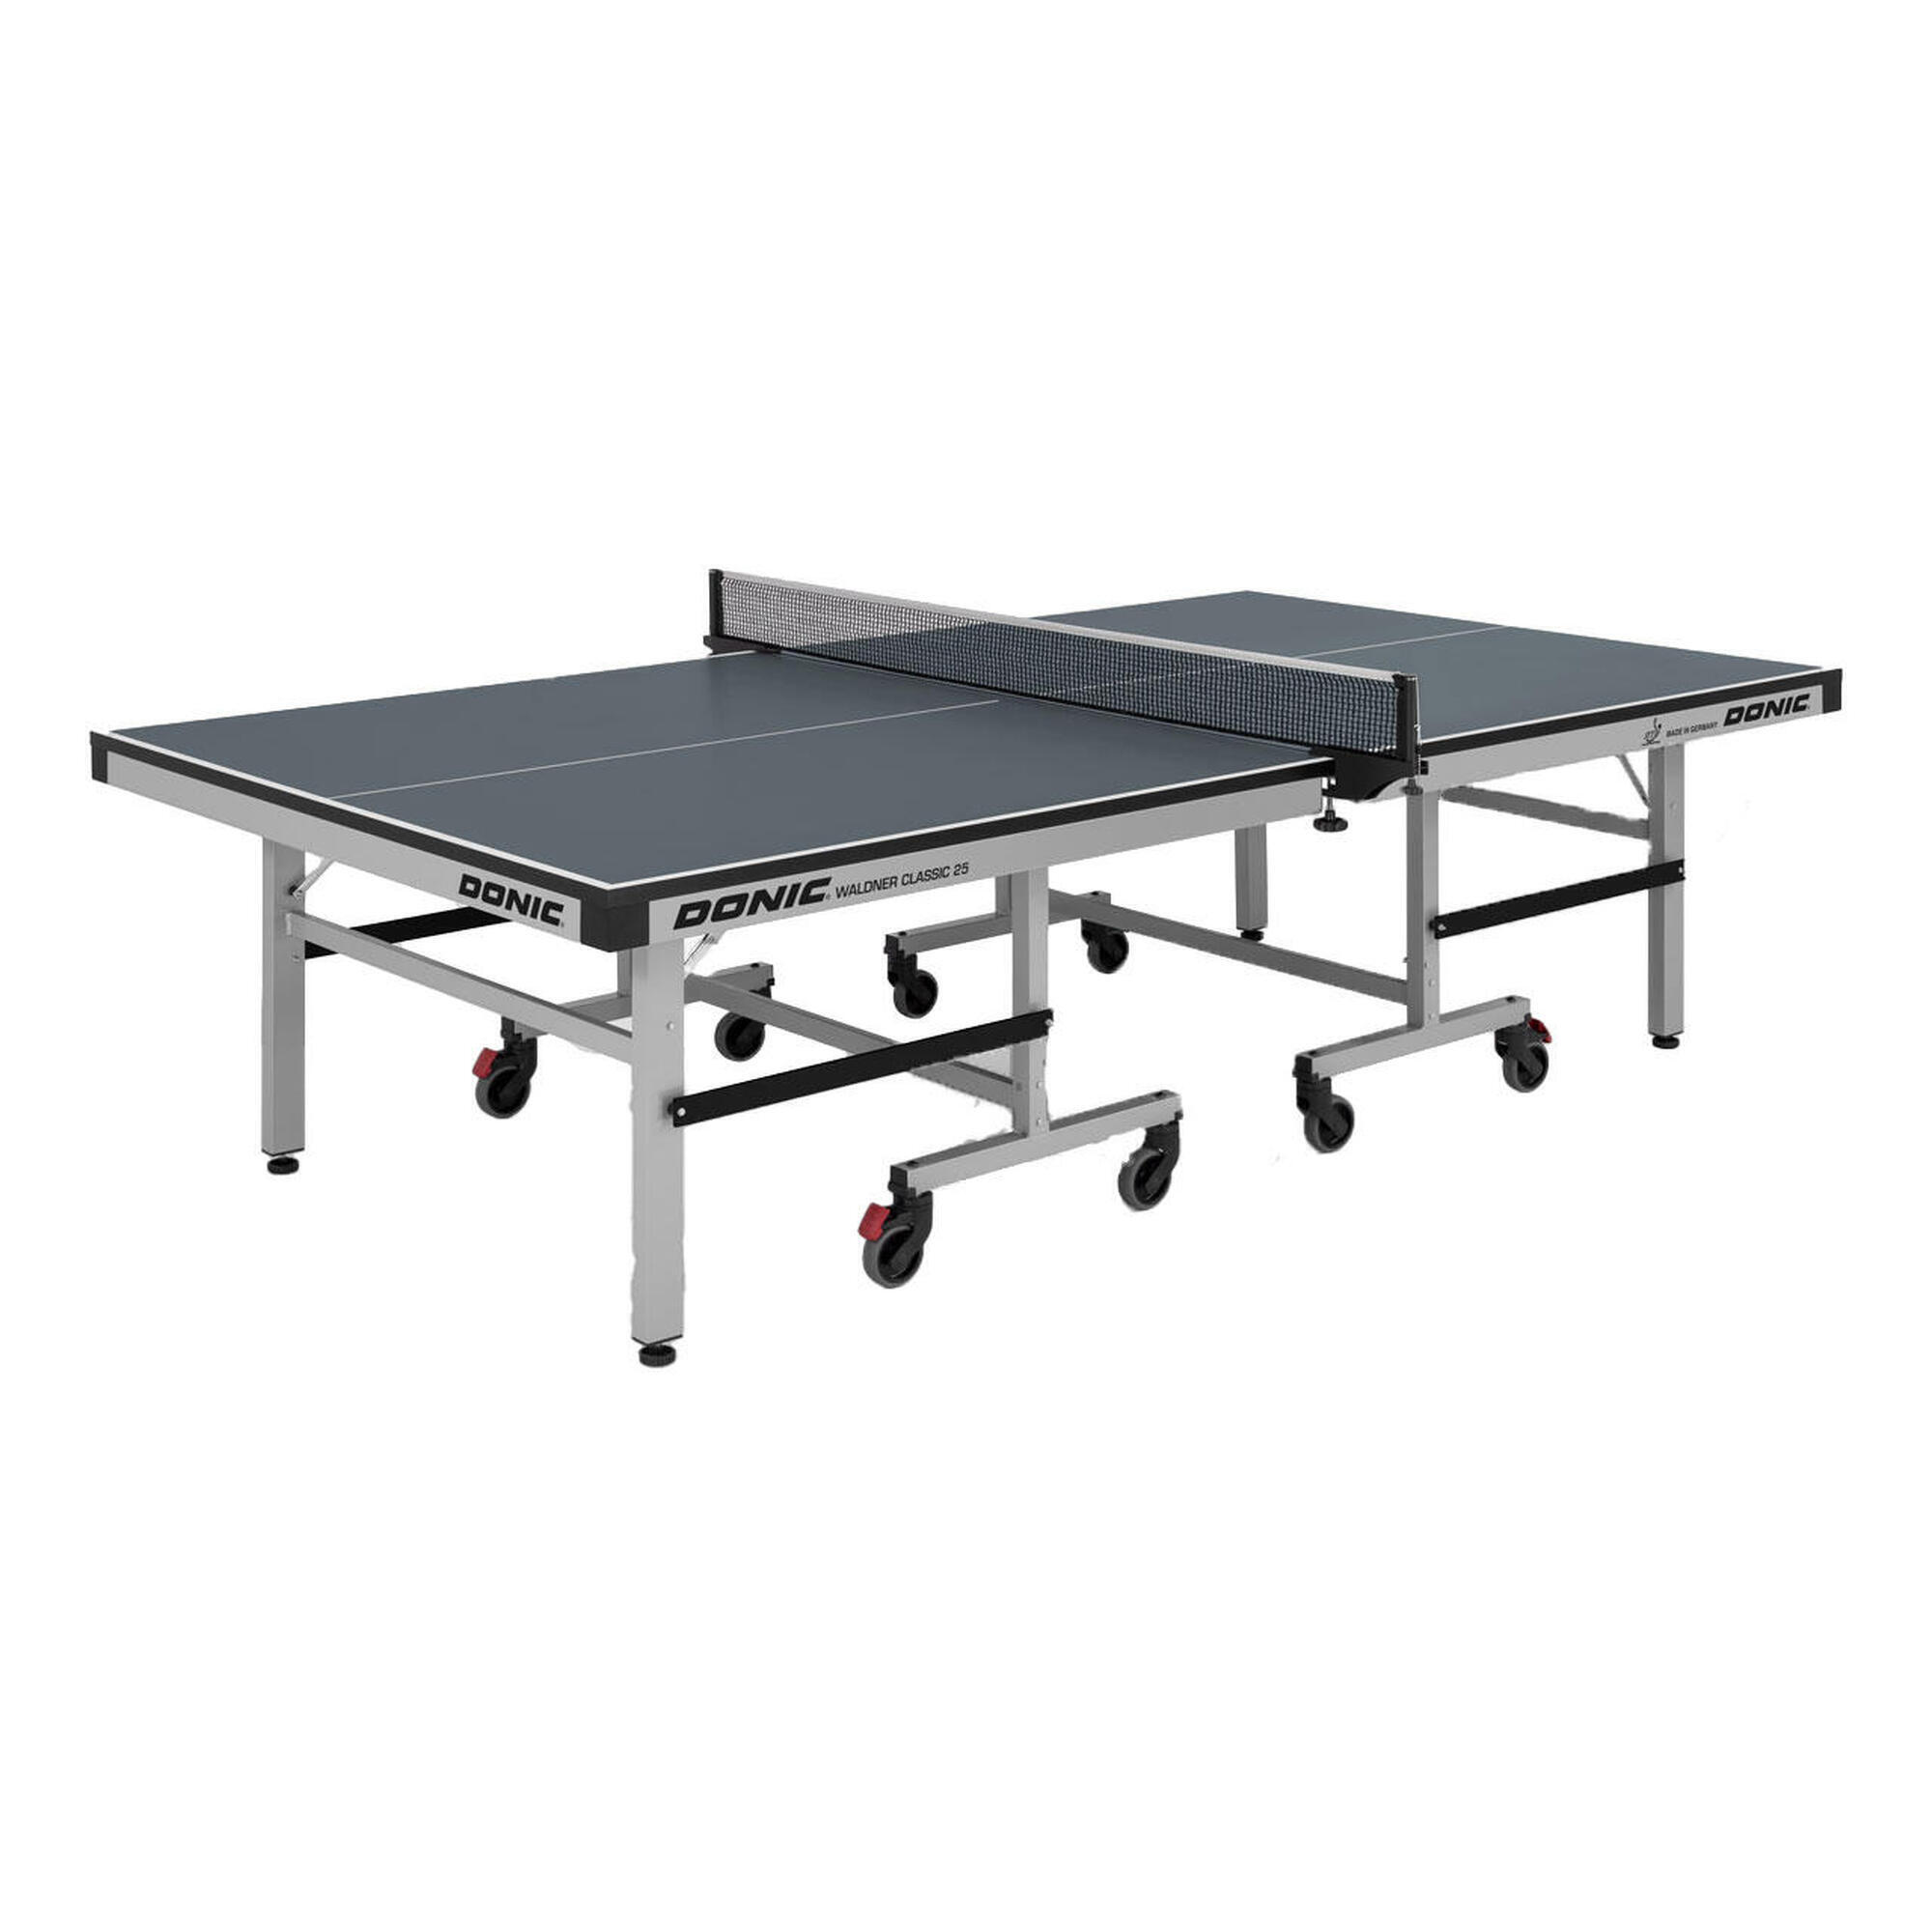 DONIC Donic Waldner Classic 25 ITTF Approved Grey Table Tennis Table